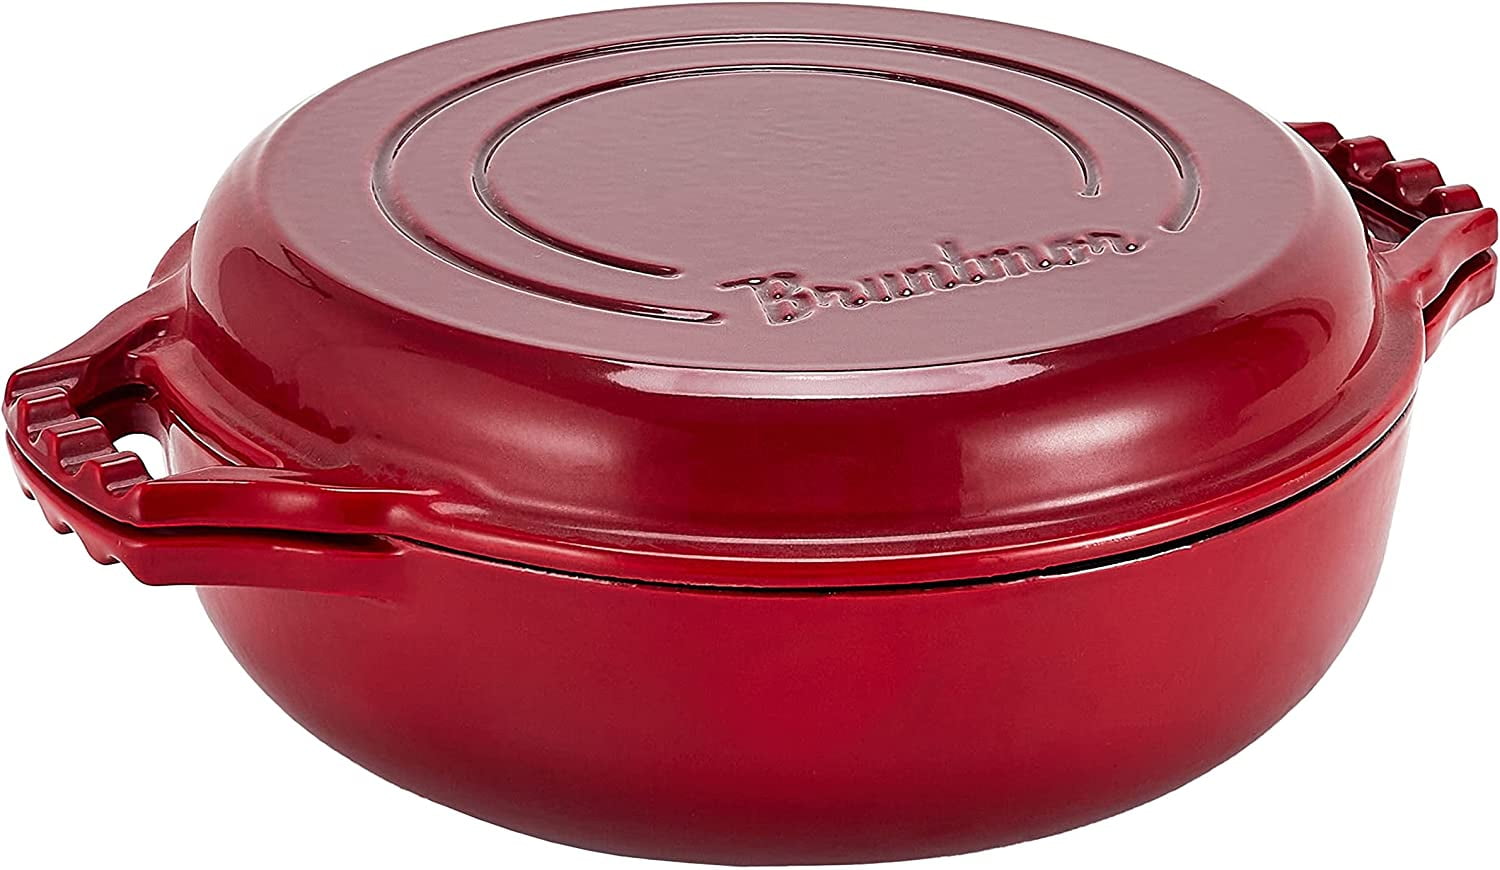 Bruntmor | 2-In-1 Enameled Cast Iron Cocotte Double Braiser Pan With Grill Lid - 3